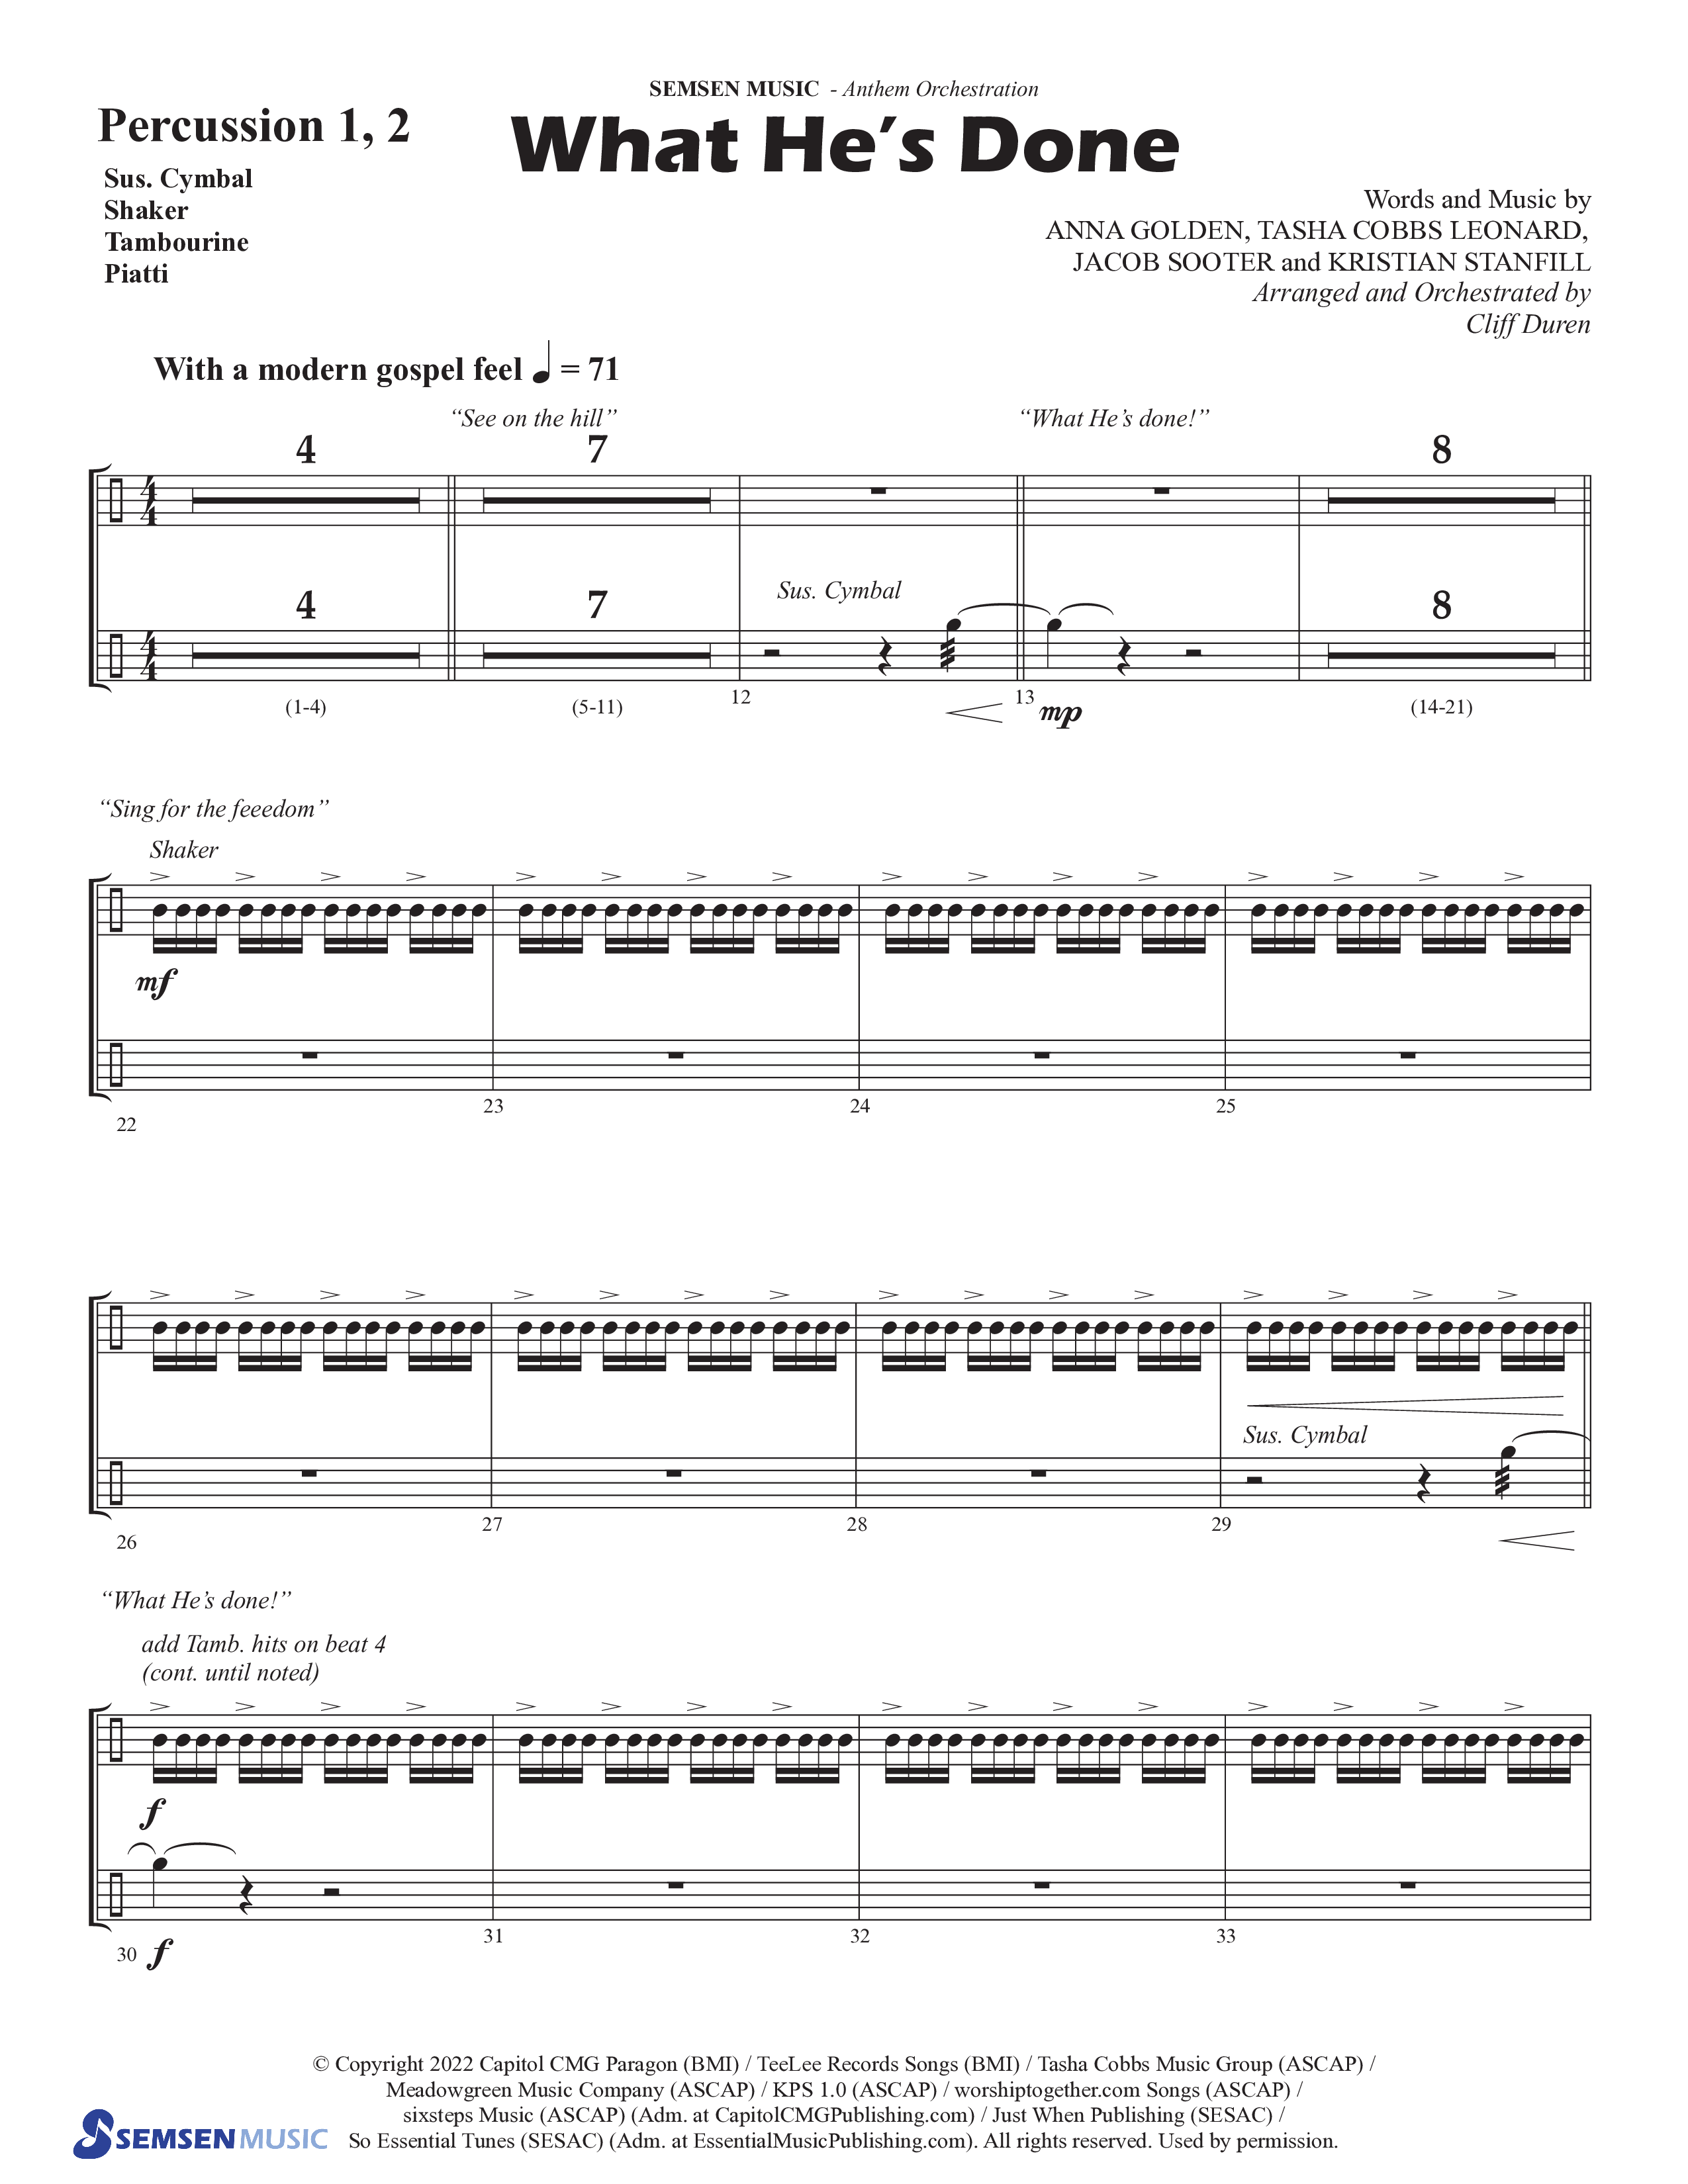 What He's Done (Choral Anthem SATB) Percussion 1/2 (Semsen Music / Arr. Cliff Duren)